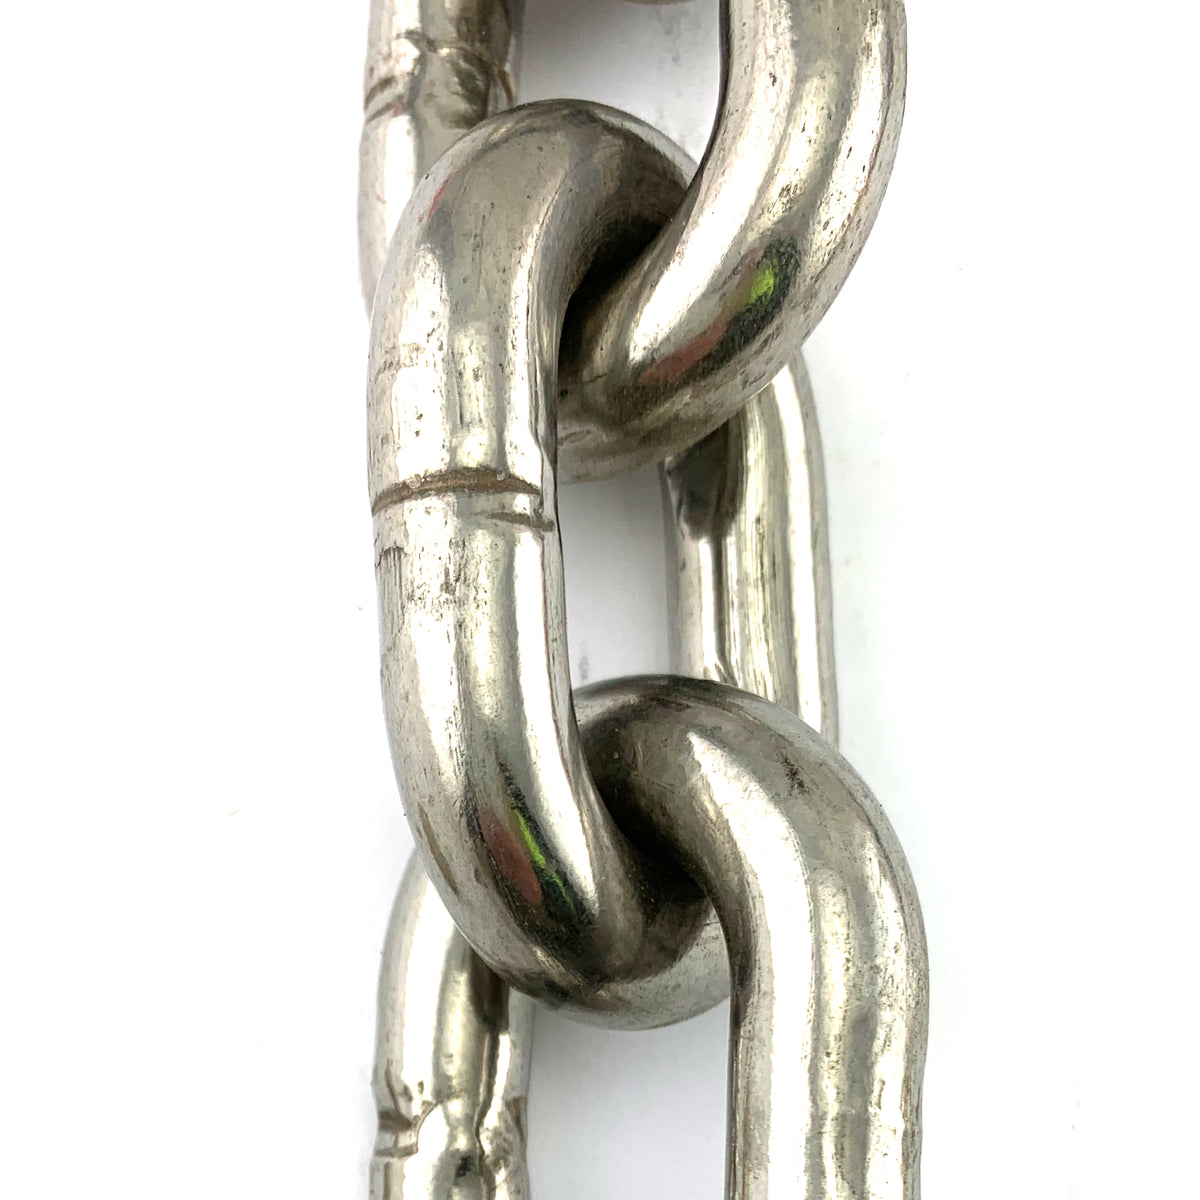 Stainless Steel Chain 13mm V2 973adc4f 9cb3 4de5 9530 8b56d2ee234a 1200x1200 ?v=1589942521